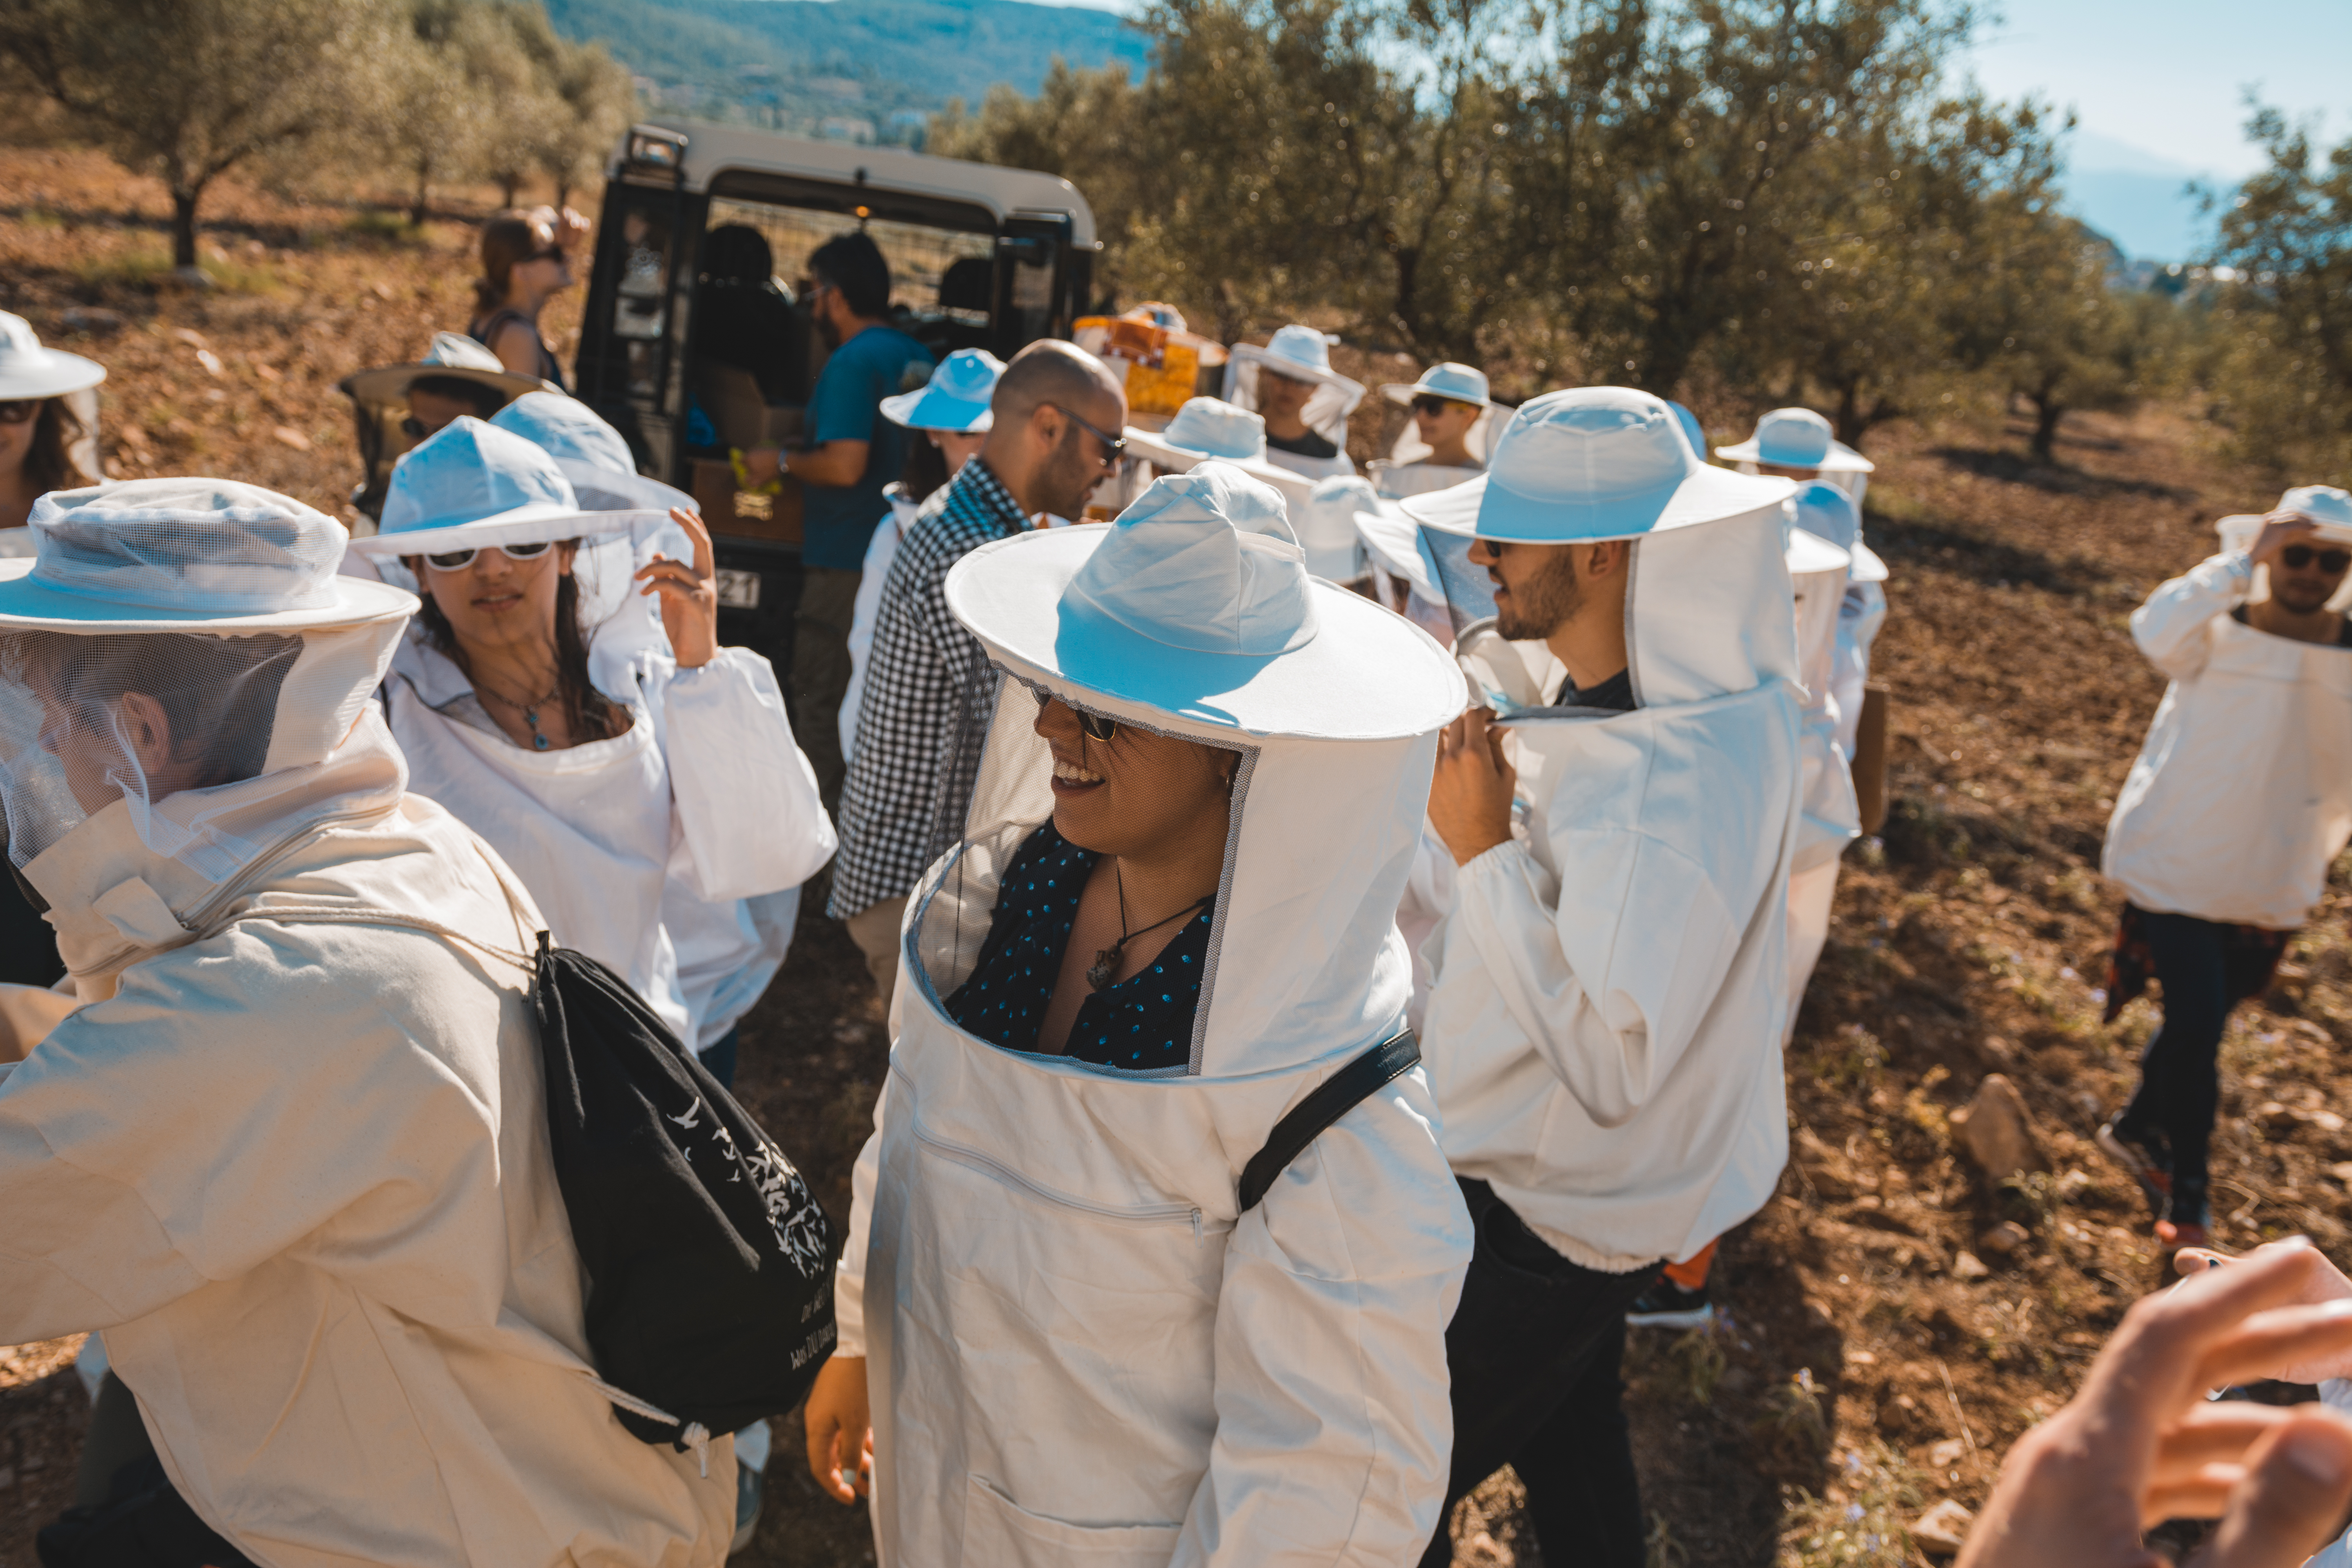 excursion to the bee keeping place